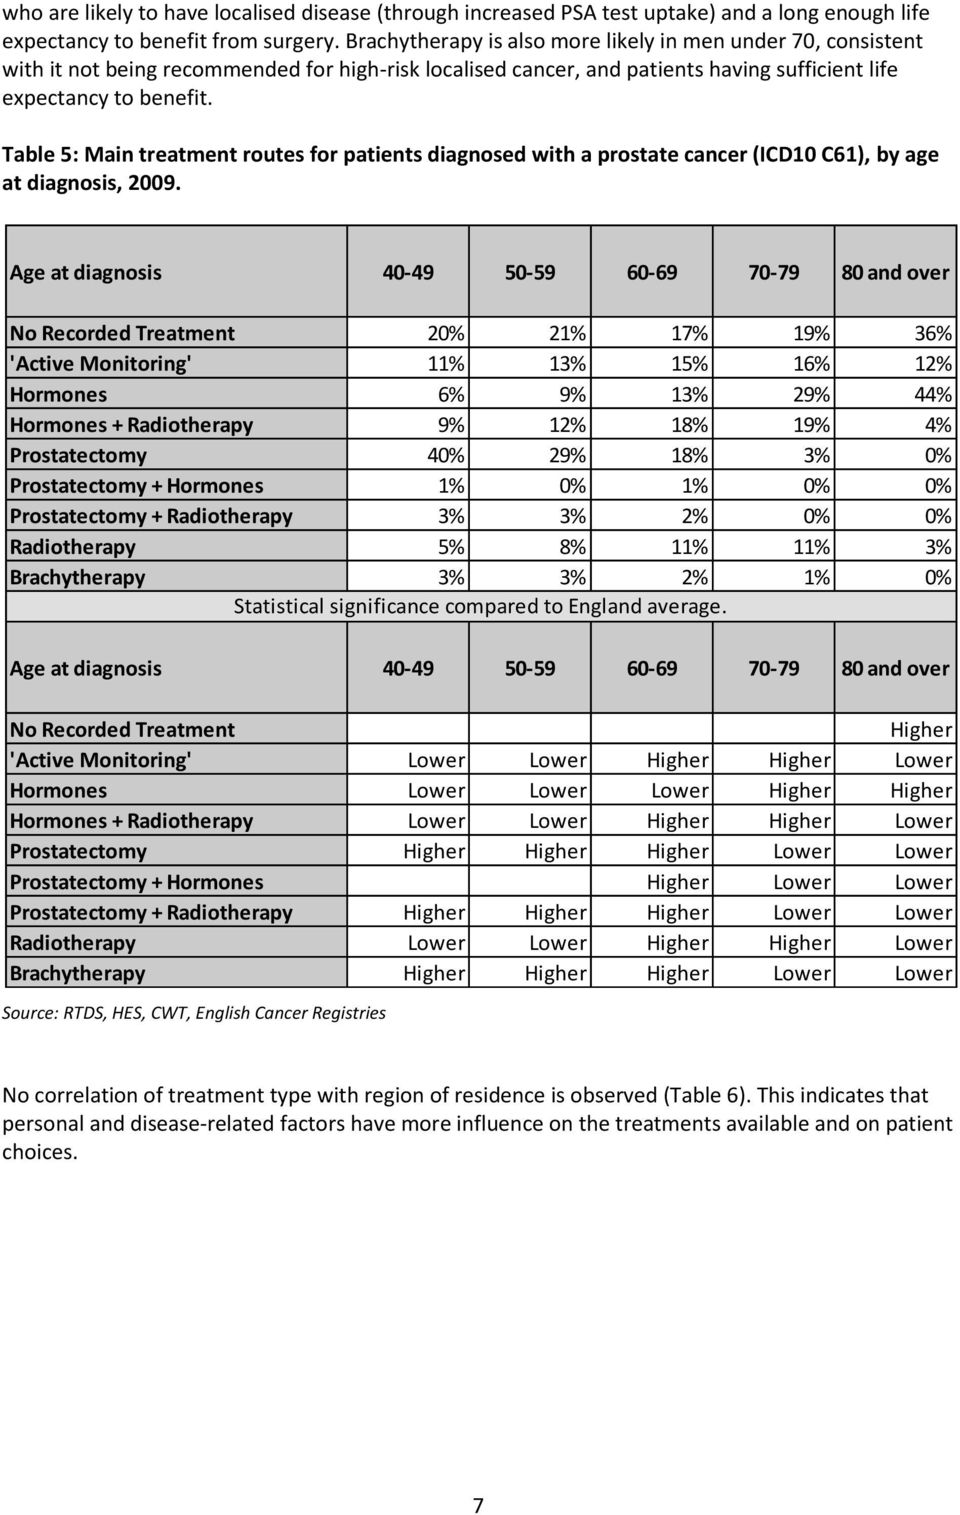 Table 5: Main treatment routes for patients diagnosed with a prostate cancer (ICD10 C61), by age at diagnosis, 2009.